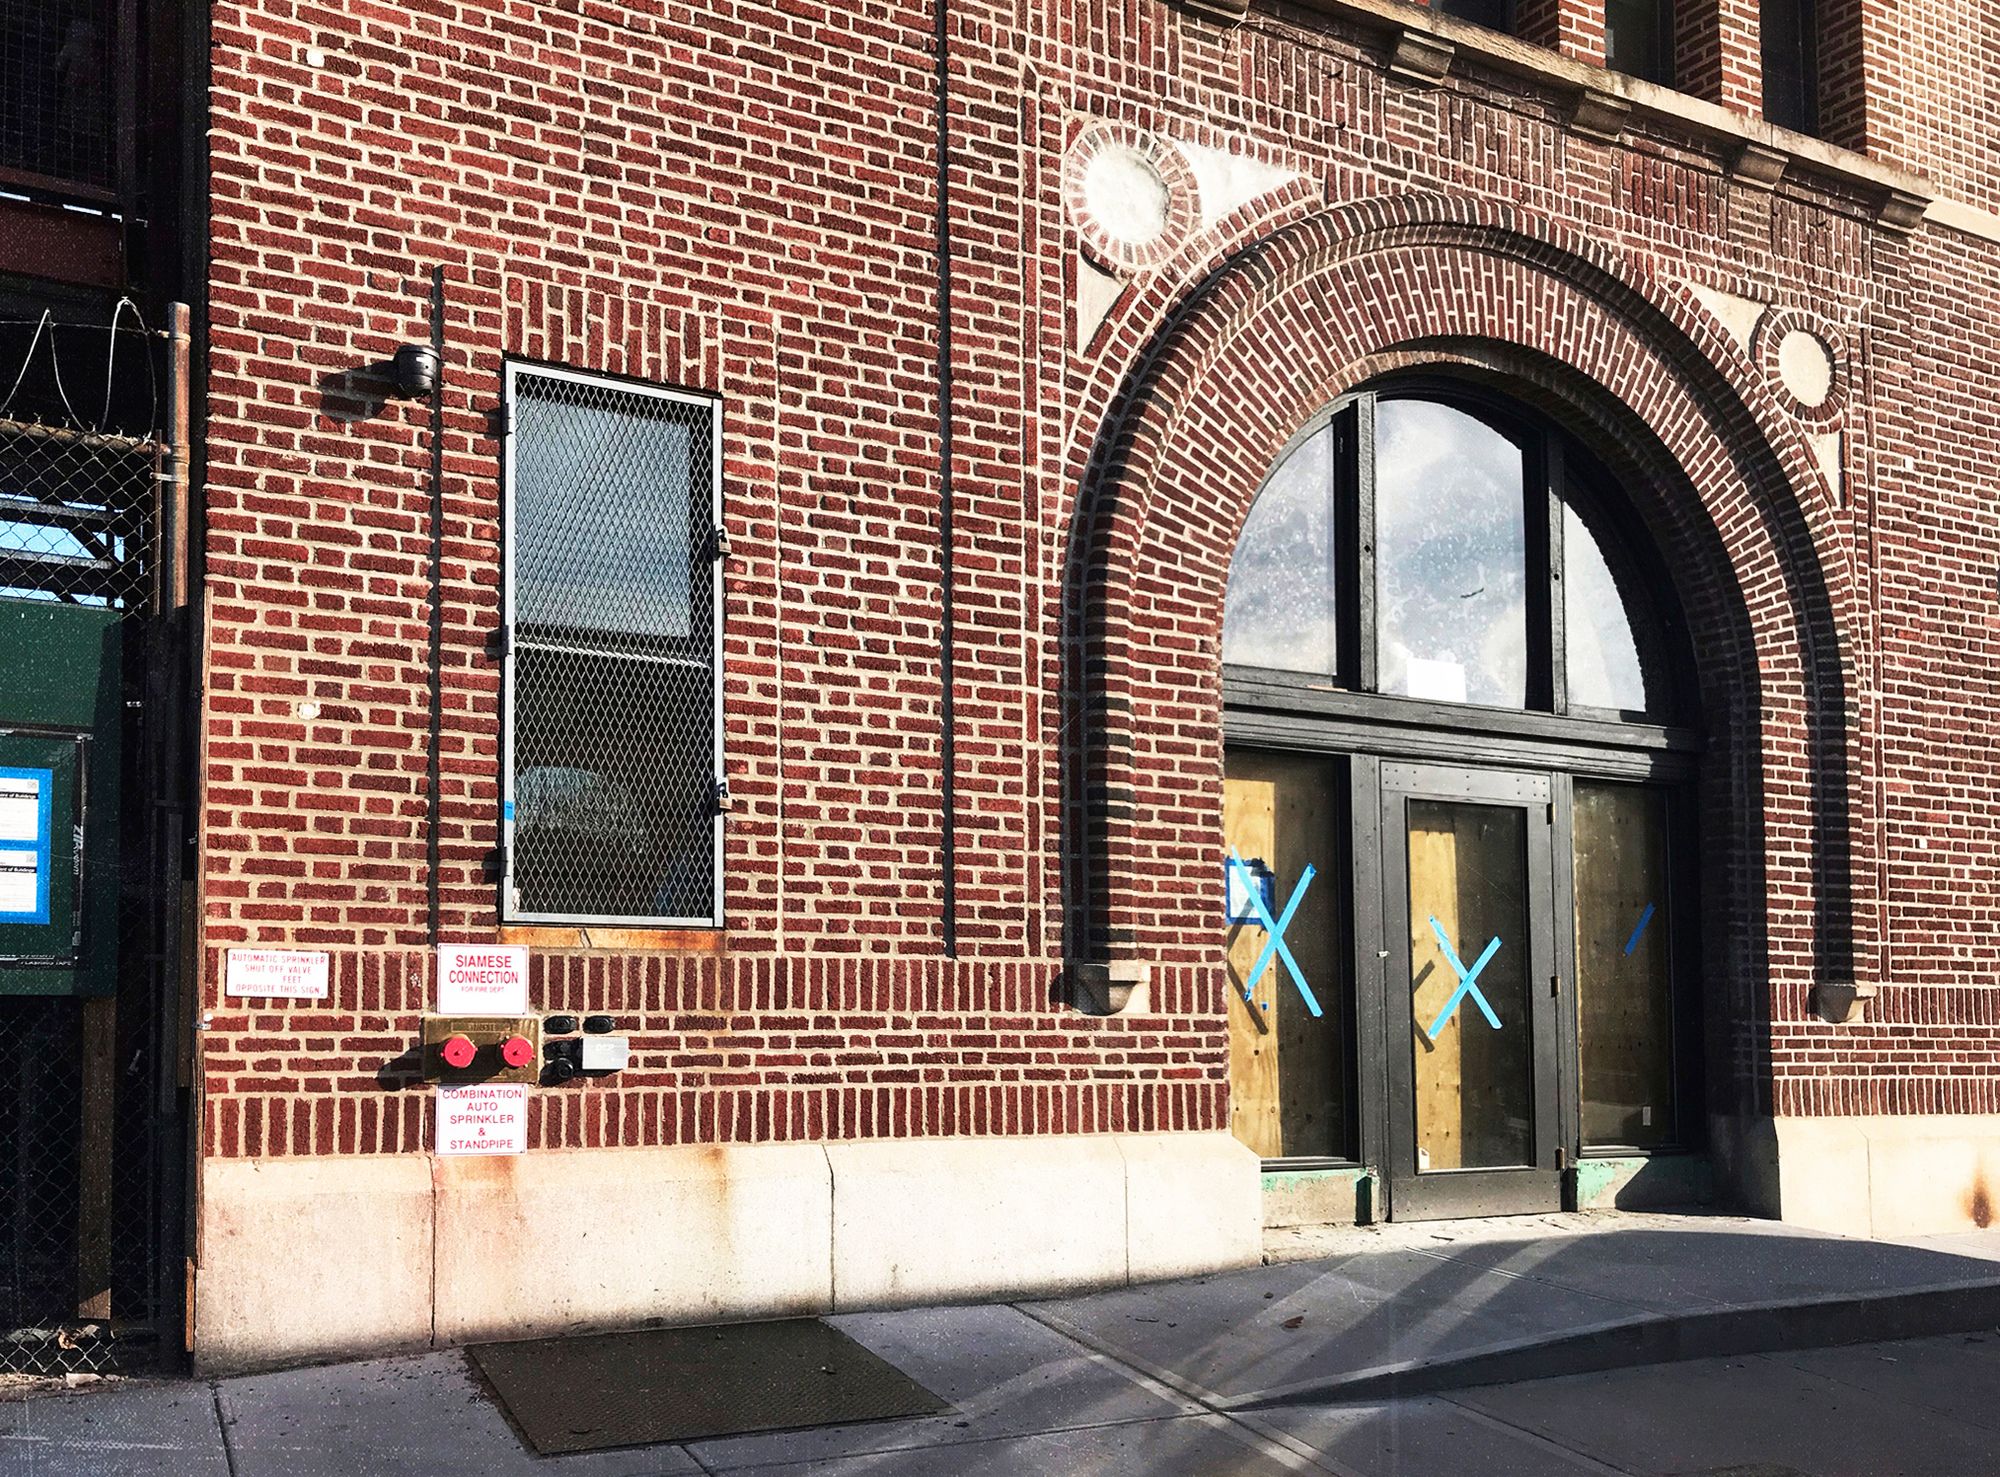 Public Records: New Music & Performance Space Coming To Gowanus